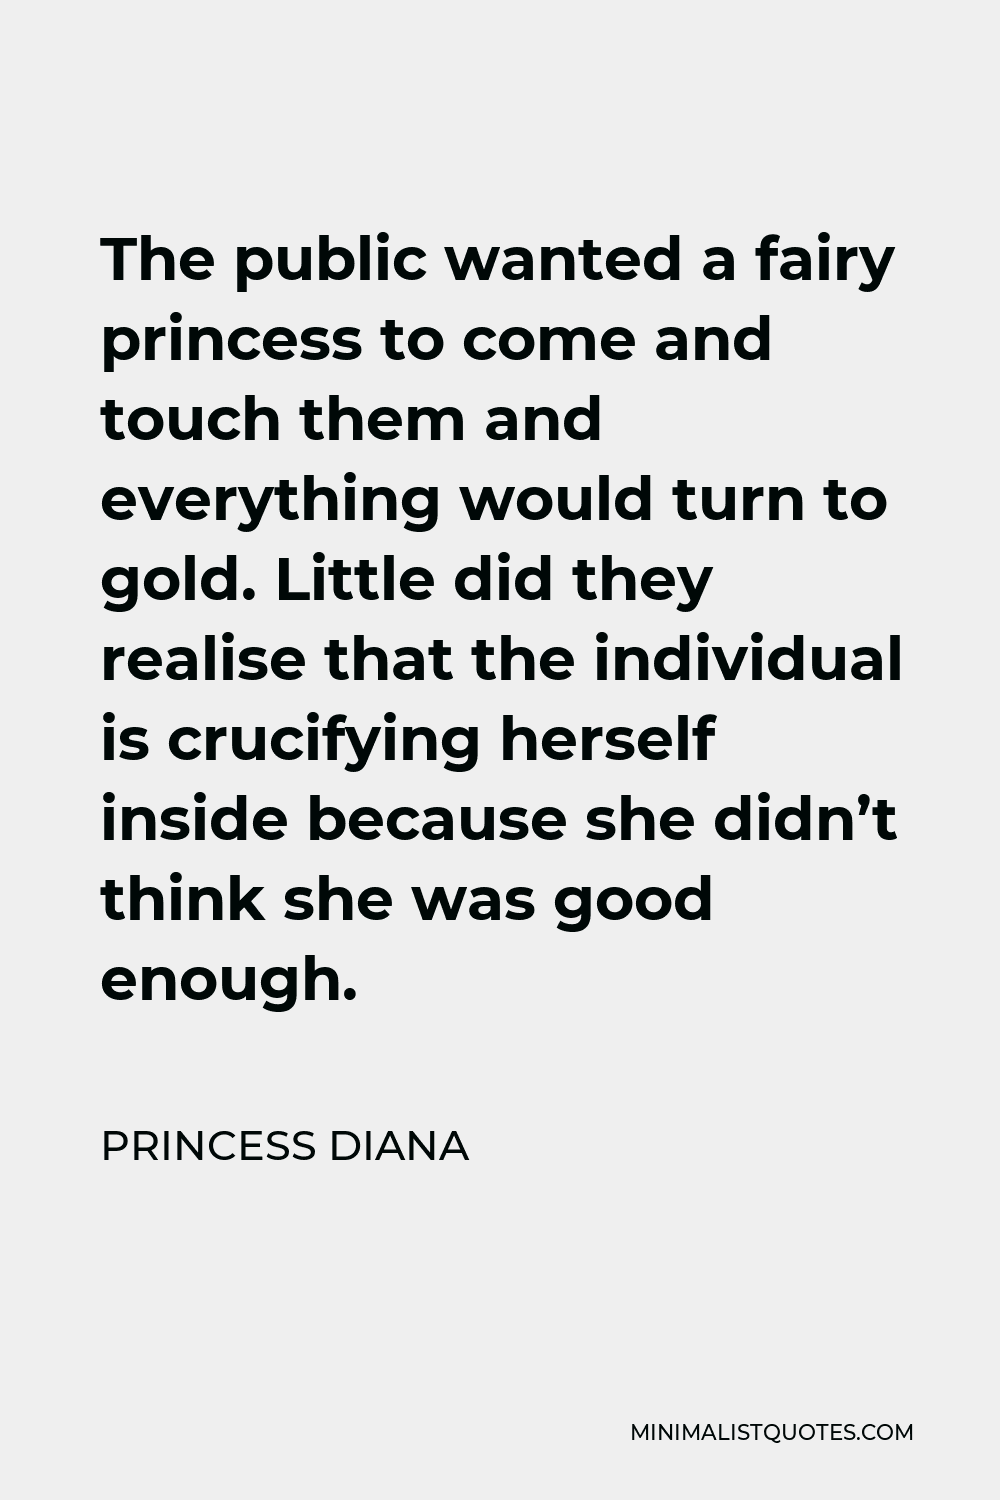 Princess Diana Quote - The public wanted a fairy princess to come and touch them and everything would turn to gold. Little did they realise that the individual is crucifying herself inside because she didn’t think she was good enough.